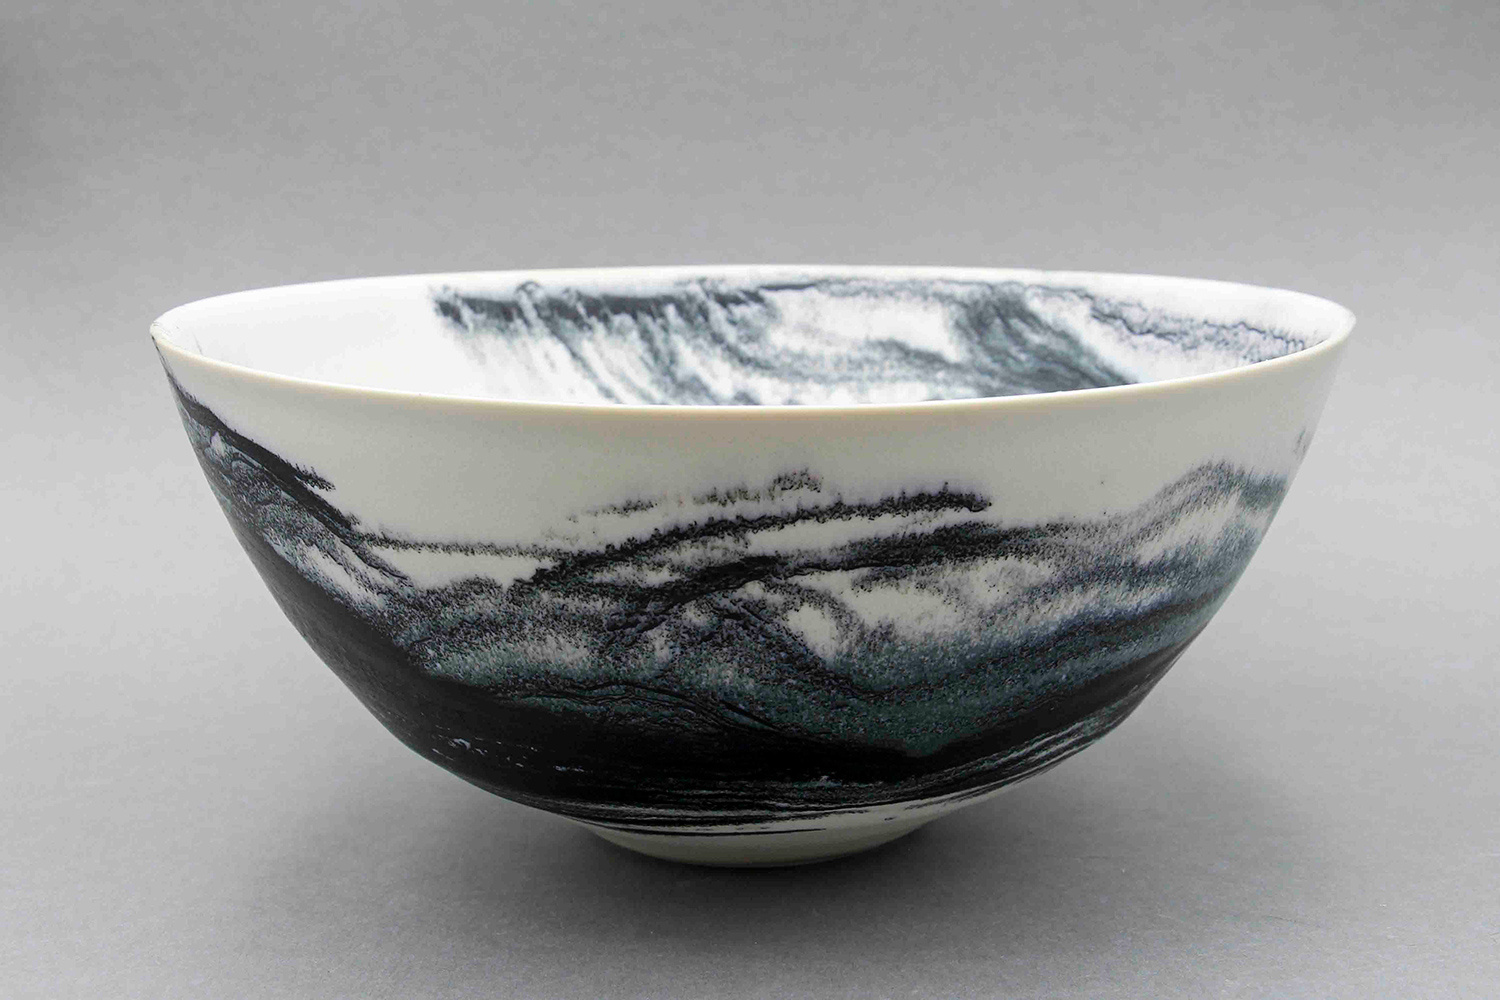 Shallow Bowl by Kyra Cane